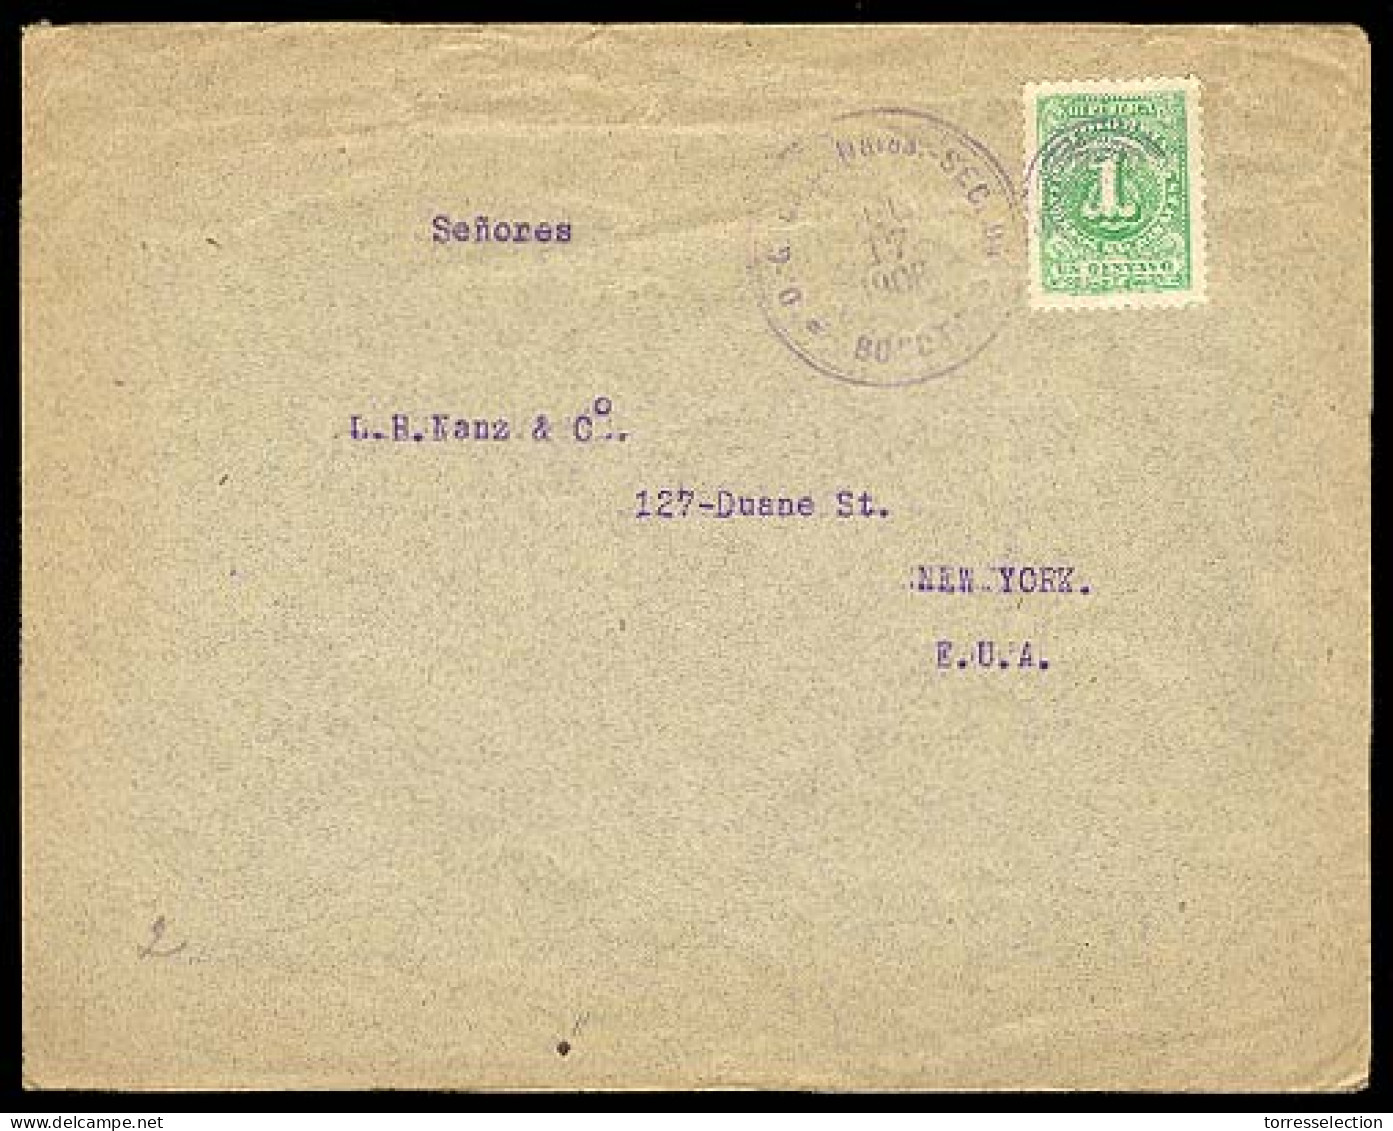 COLOMBIA. 1908 (July 18). Sc. 315. Bogota To USA. Printed Matter Rate. Franked Envelope. - Colombia